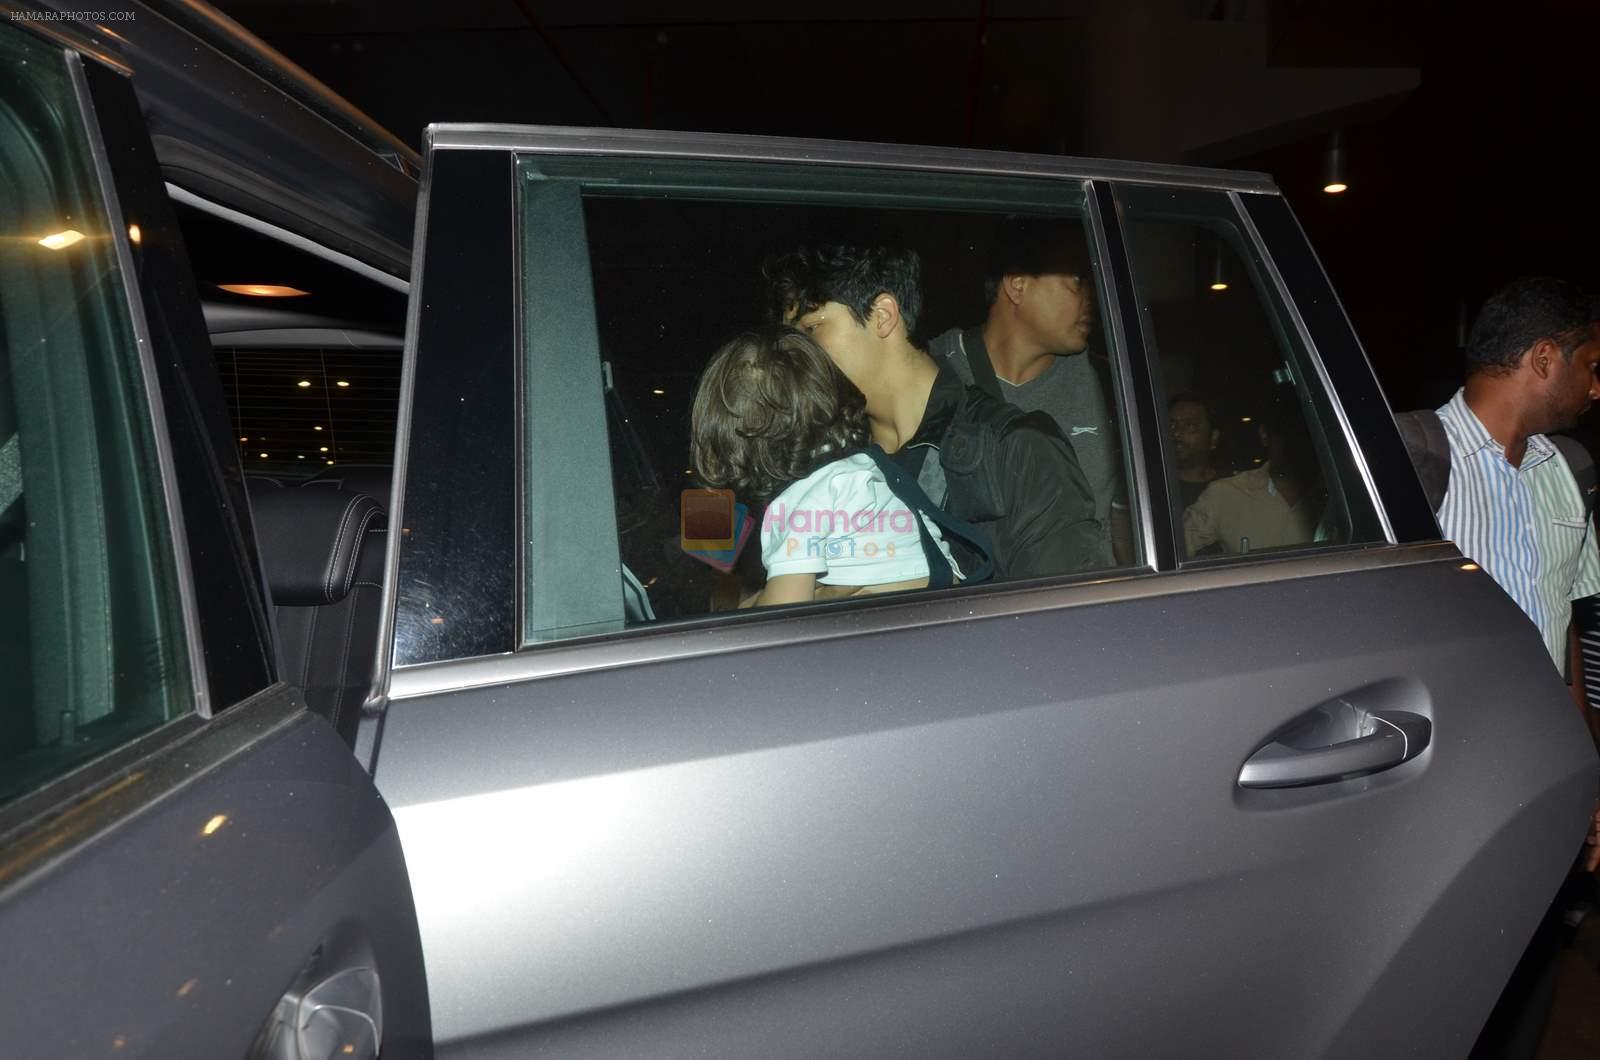 Shahrukh Khan returns with family at airport from London in International Airport on 27th June 2015